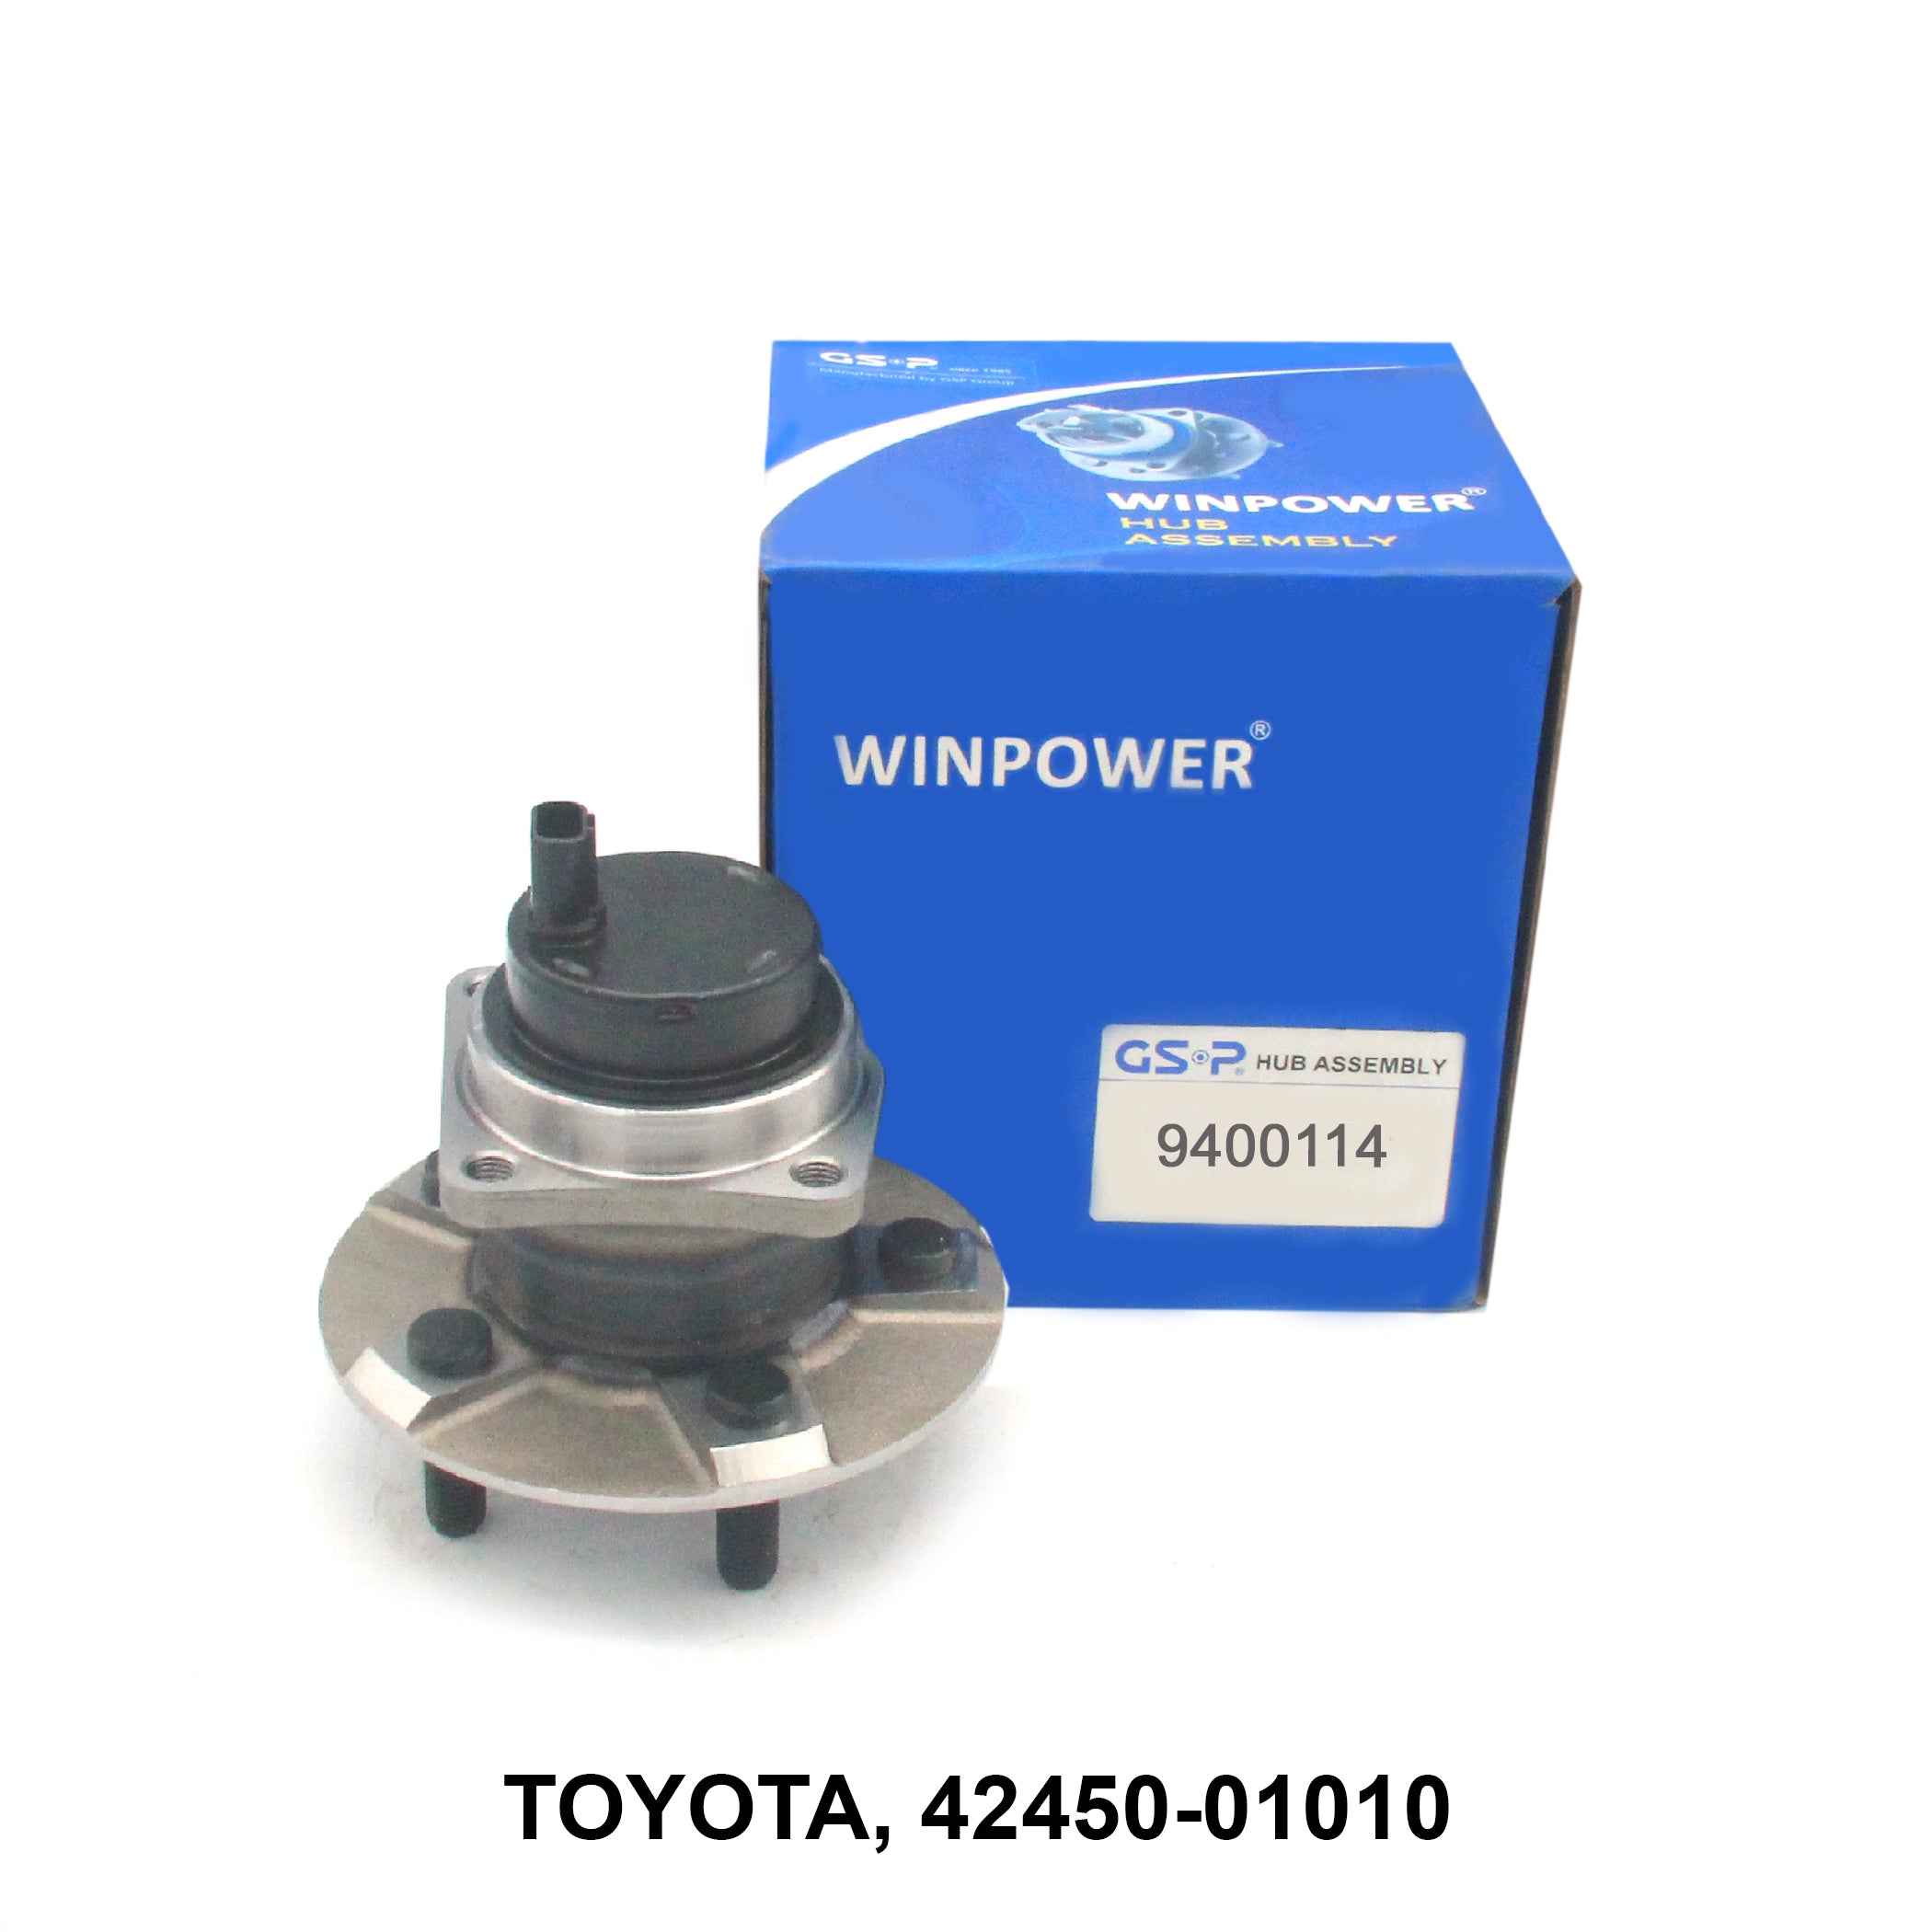 Hub Assembly, GSP+WINPOWER, 42450-01010, 9400114 (005192)